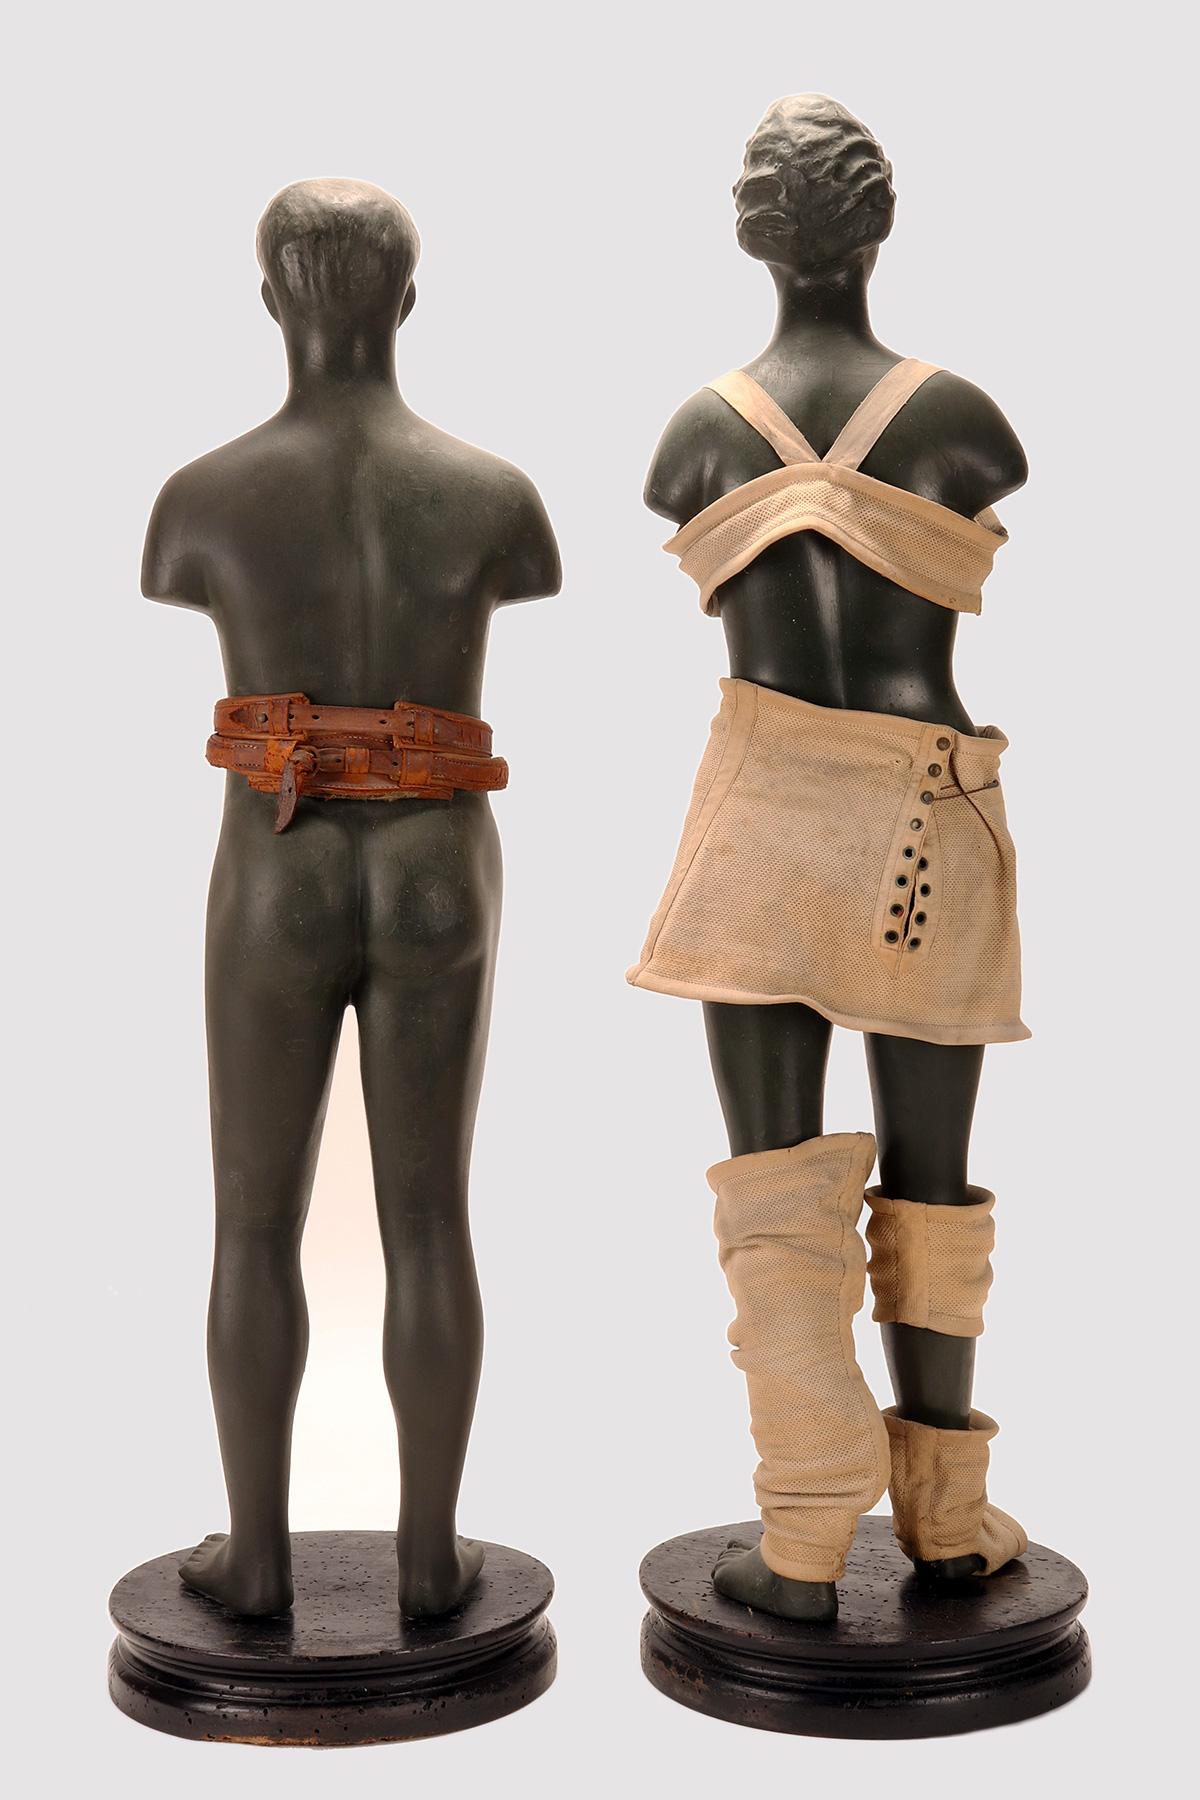 Advertising mannequin for elastic and containment belts, France 1920. 1